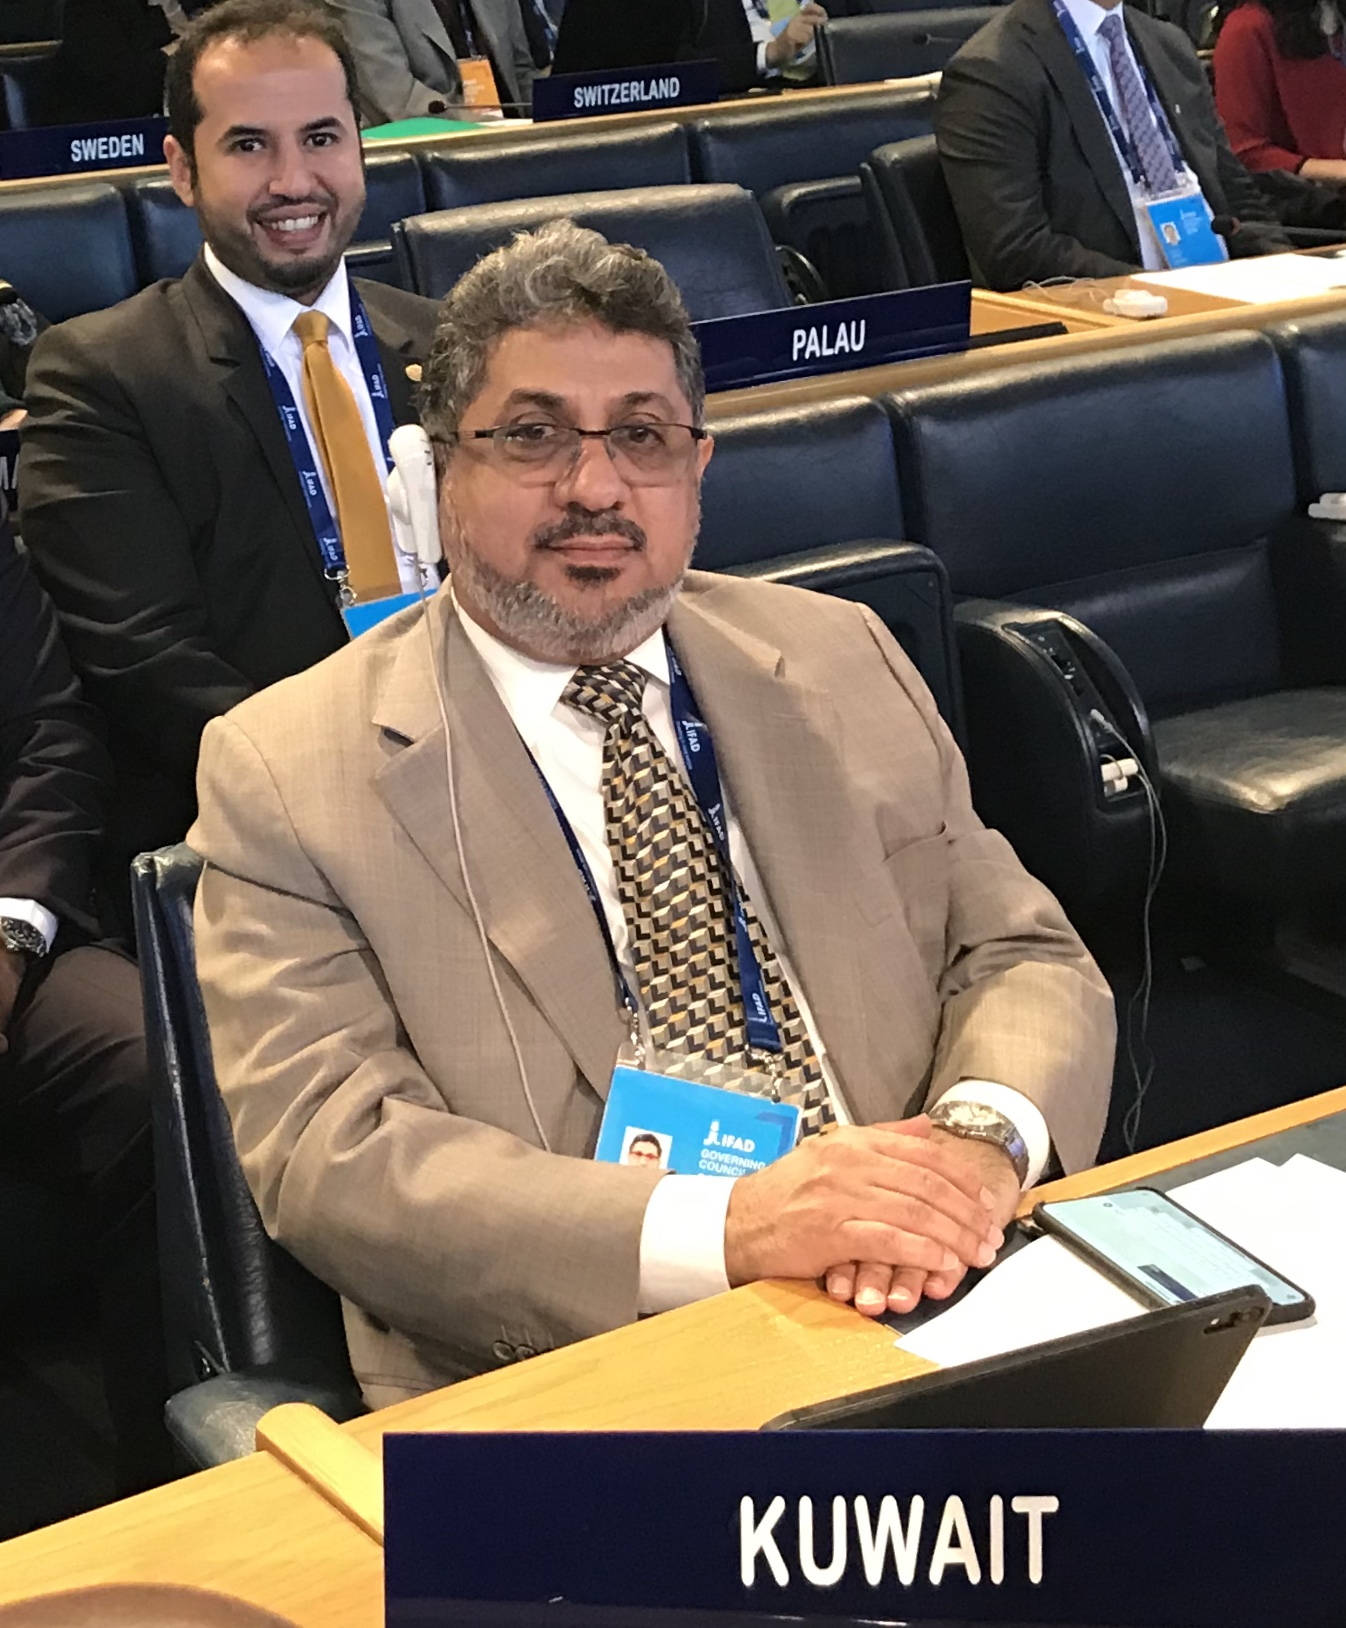 Kuwaiti official at the International Fund for Agricultural Development (IFAD) Marwan Al-Ghanim